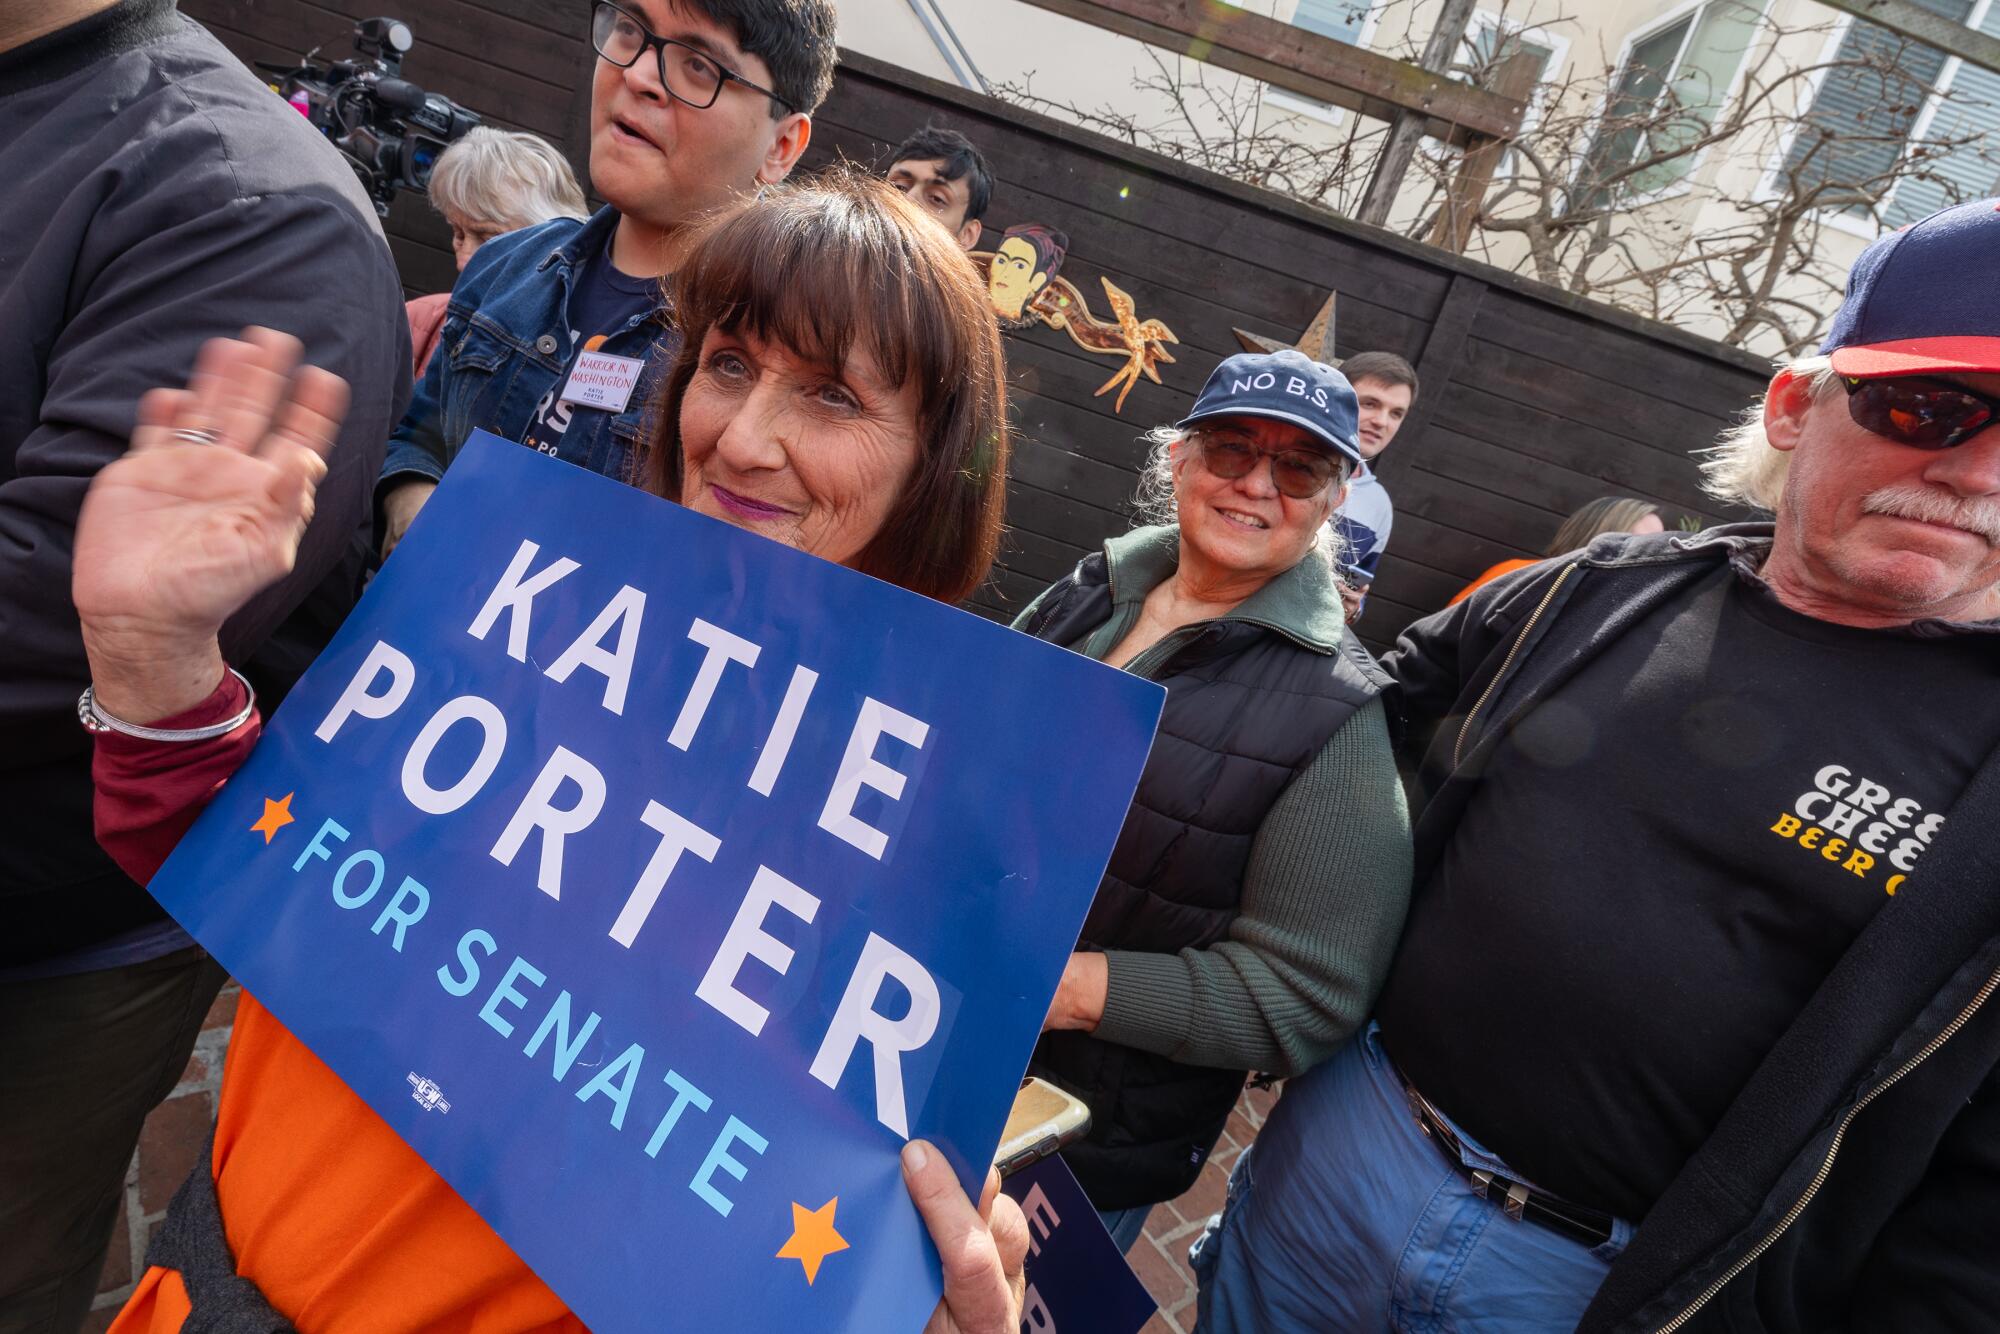 A woman at a rally holds a sign that says, "Katie Porter for Senate"